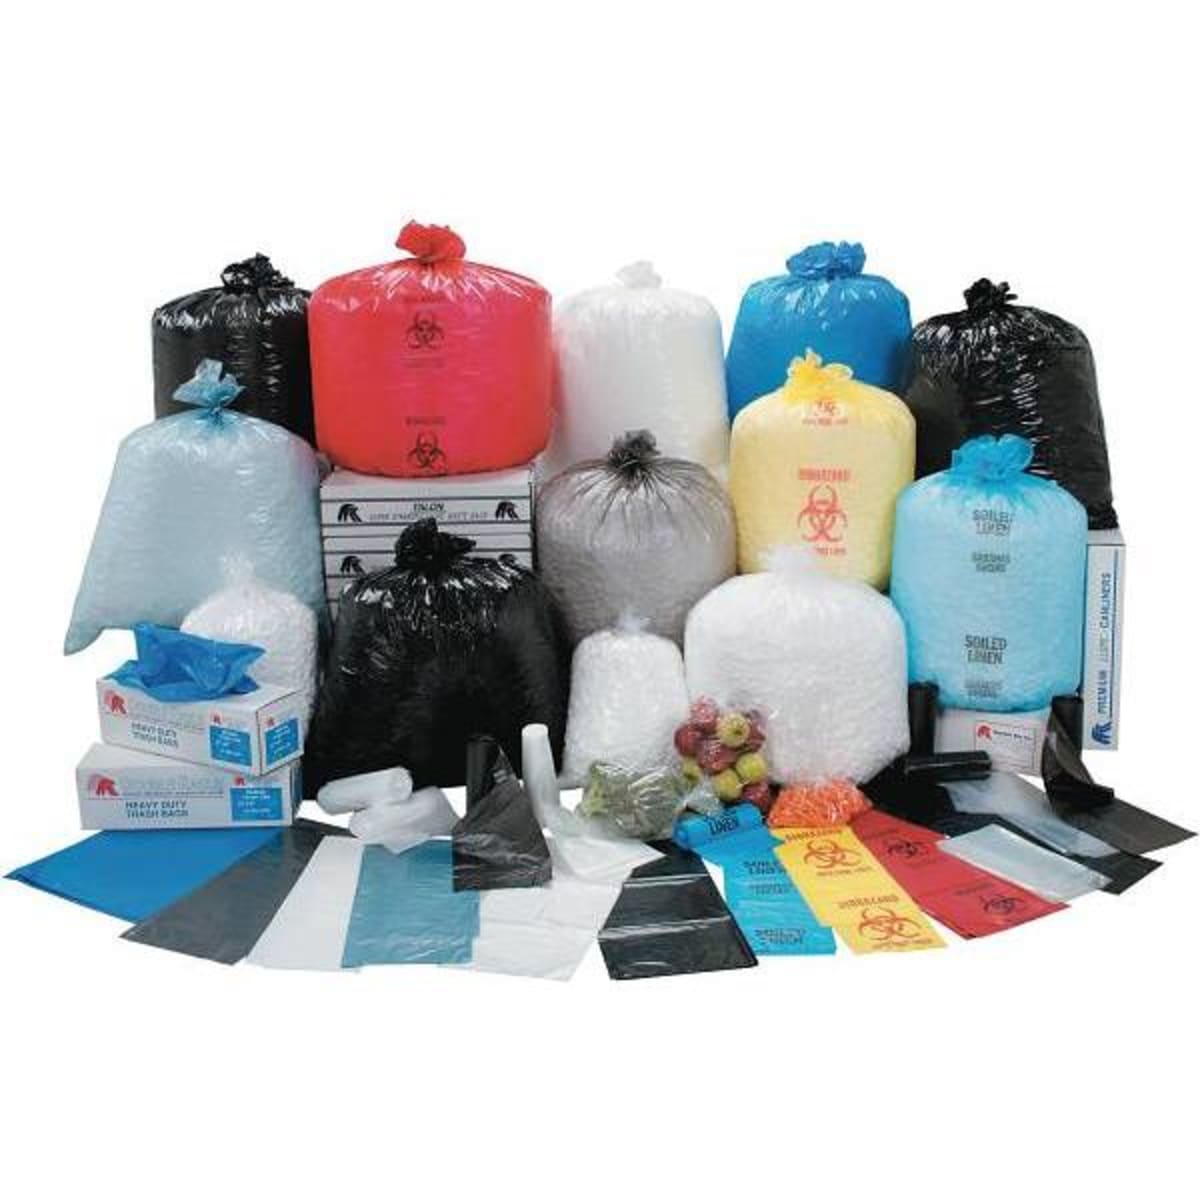 7-10 Gallons 1 Mil Clear Low Density Trash Bags 15x9x23 - 500 Bags